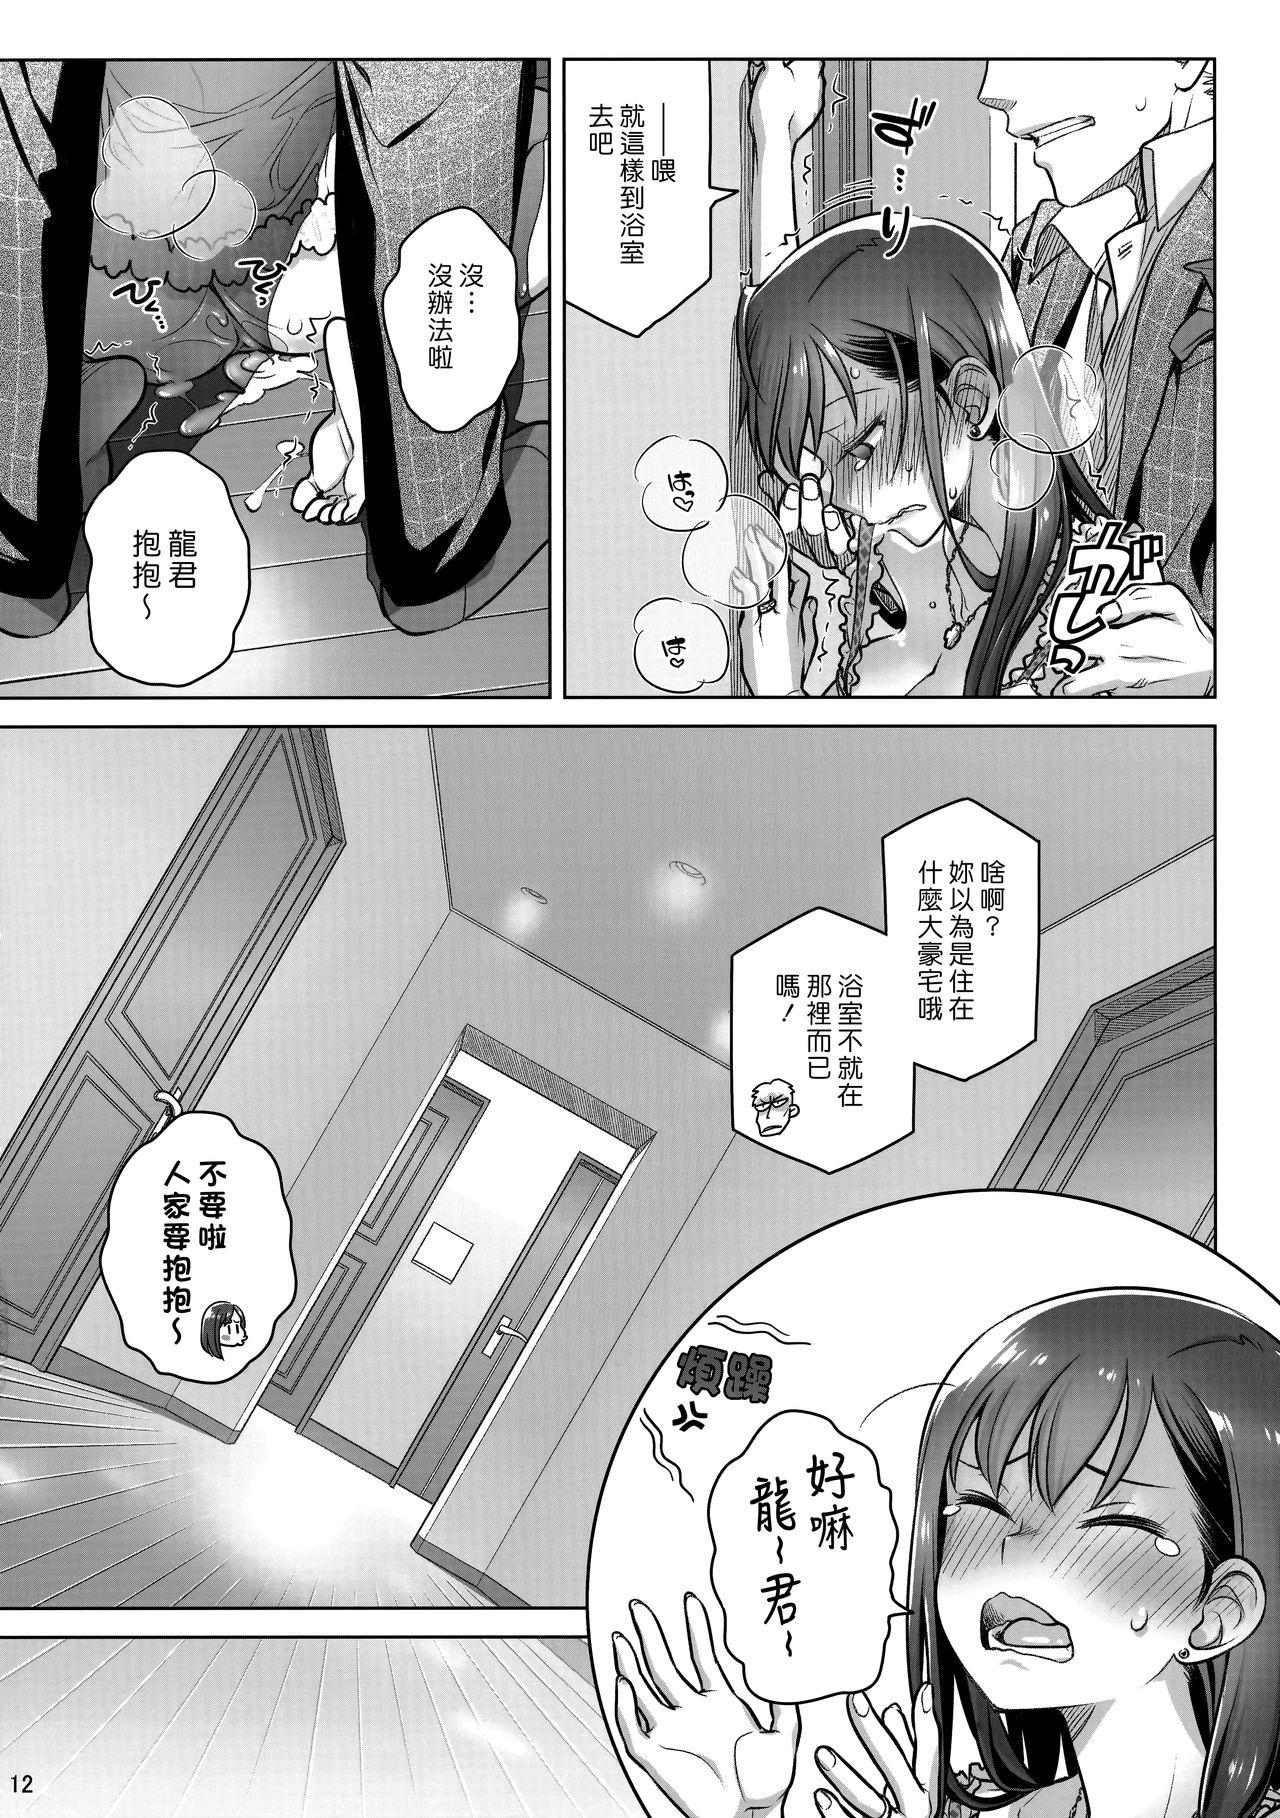 Playing Stay by MeㆍBangaihen - Original POV - Page 10